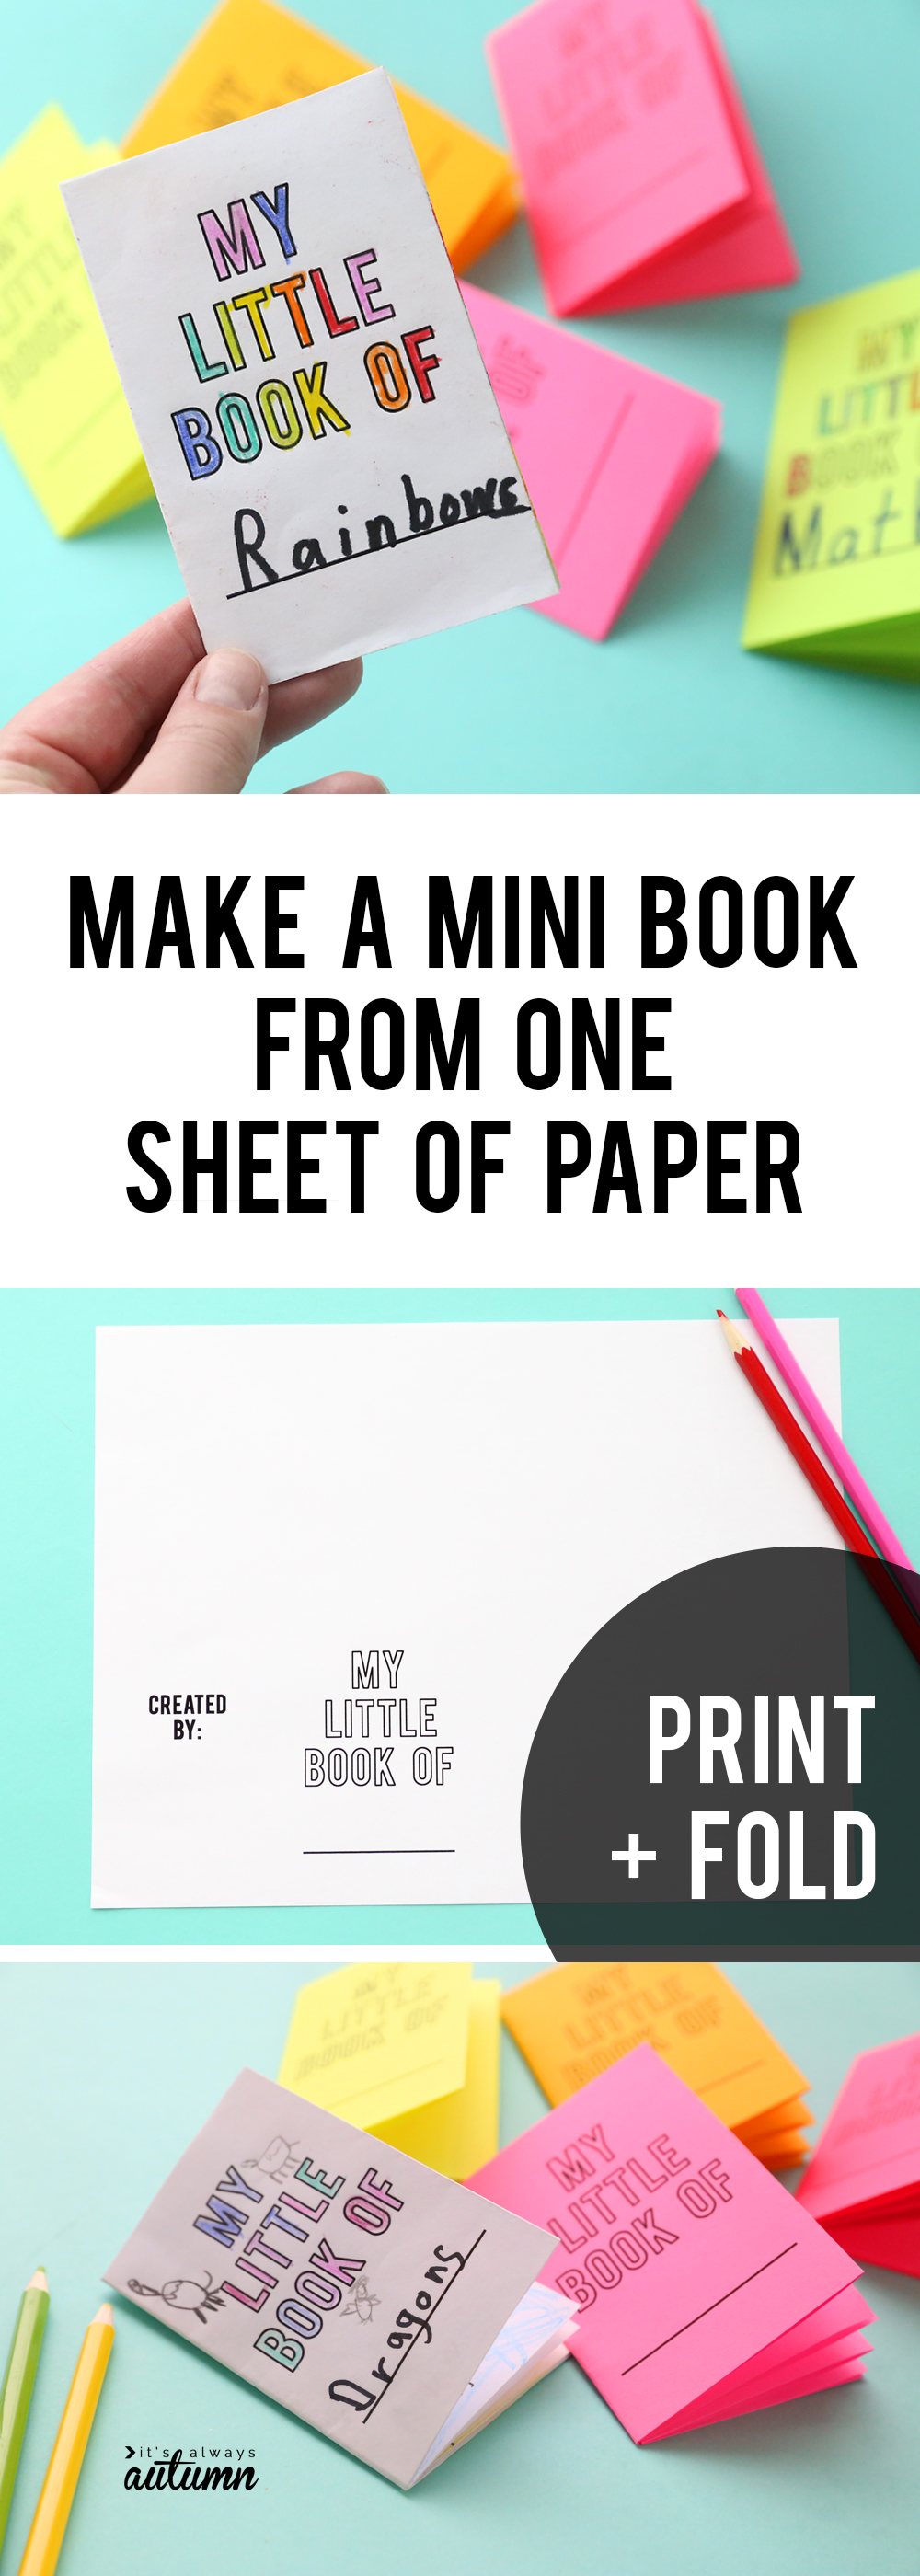 how-to-make-a-mini-book-template-zine-template-english-resources